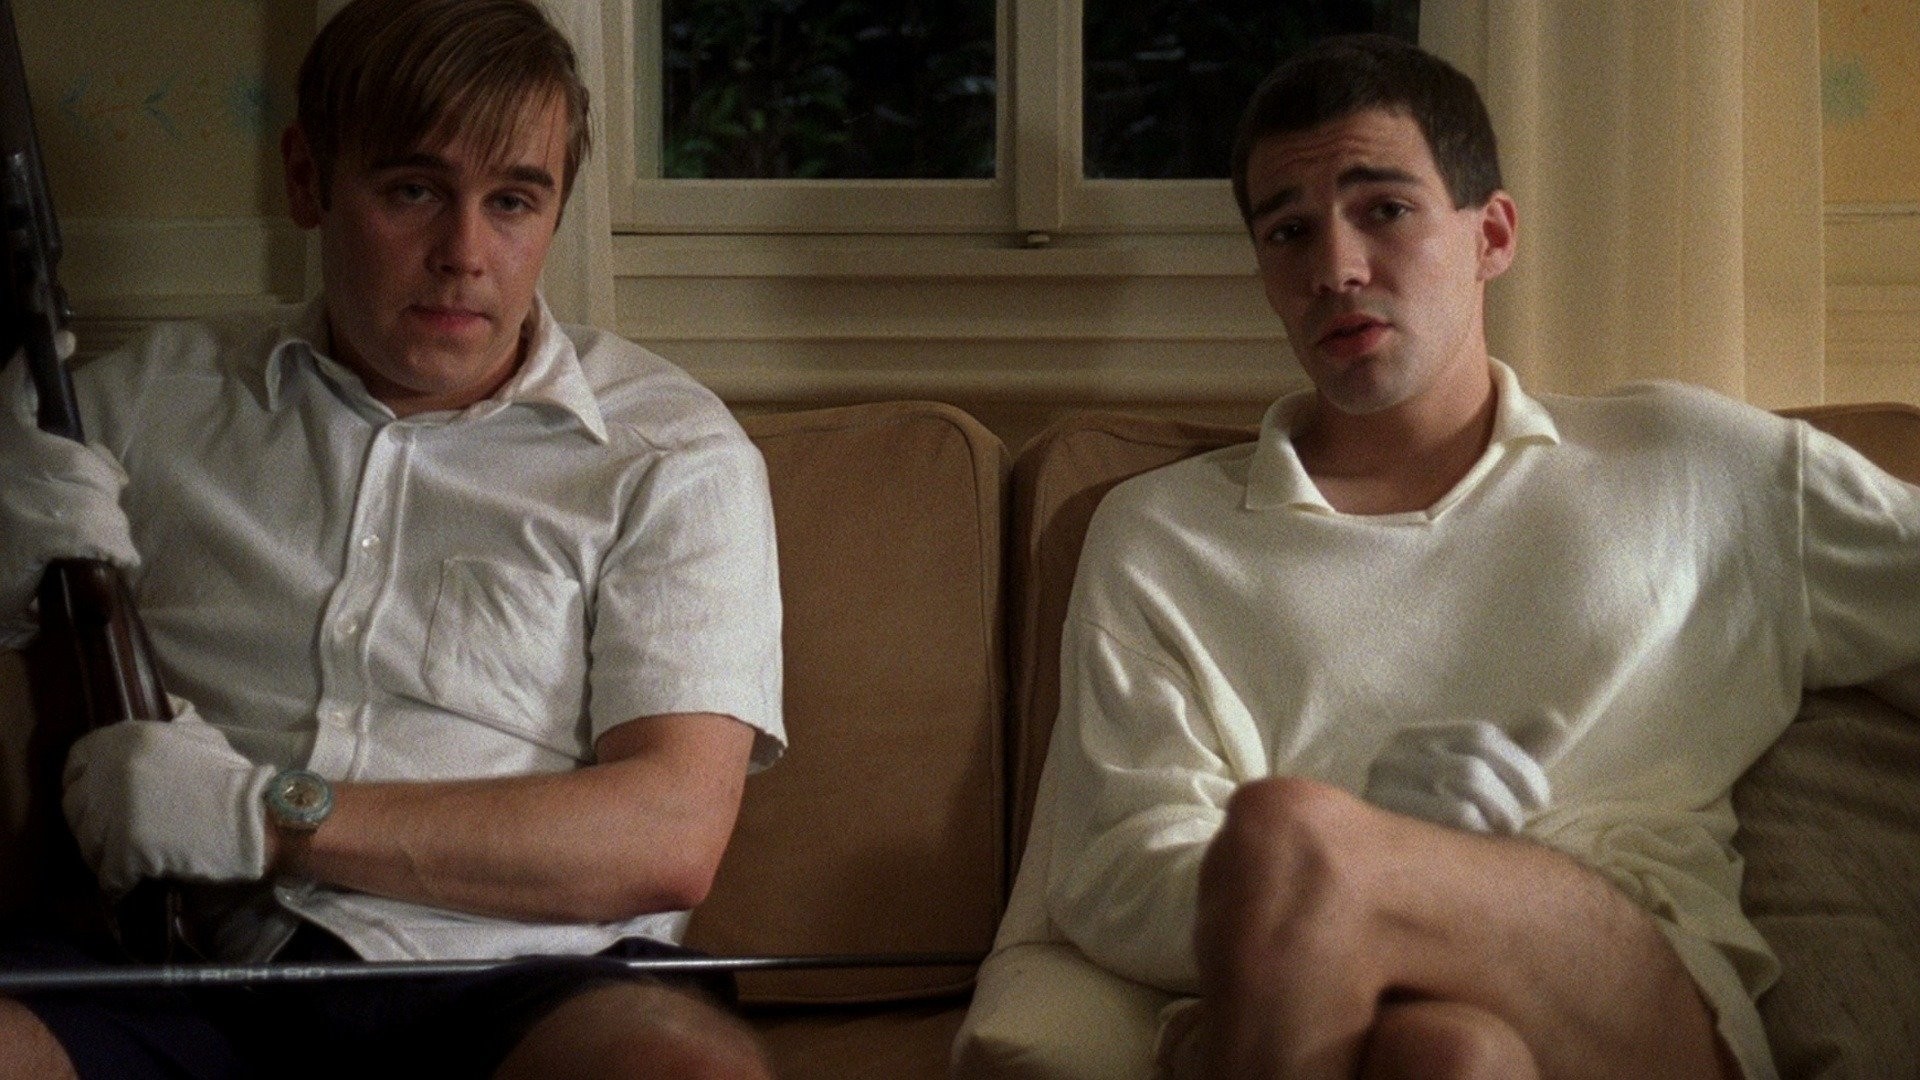  Funny games : Movies & TV